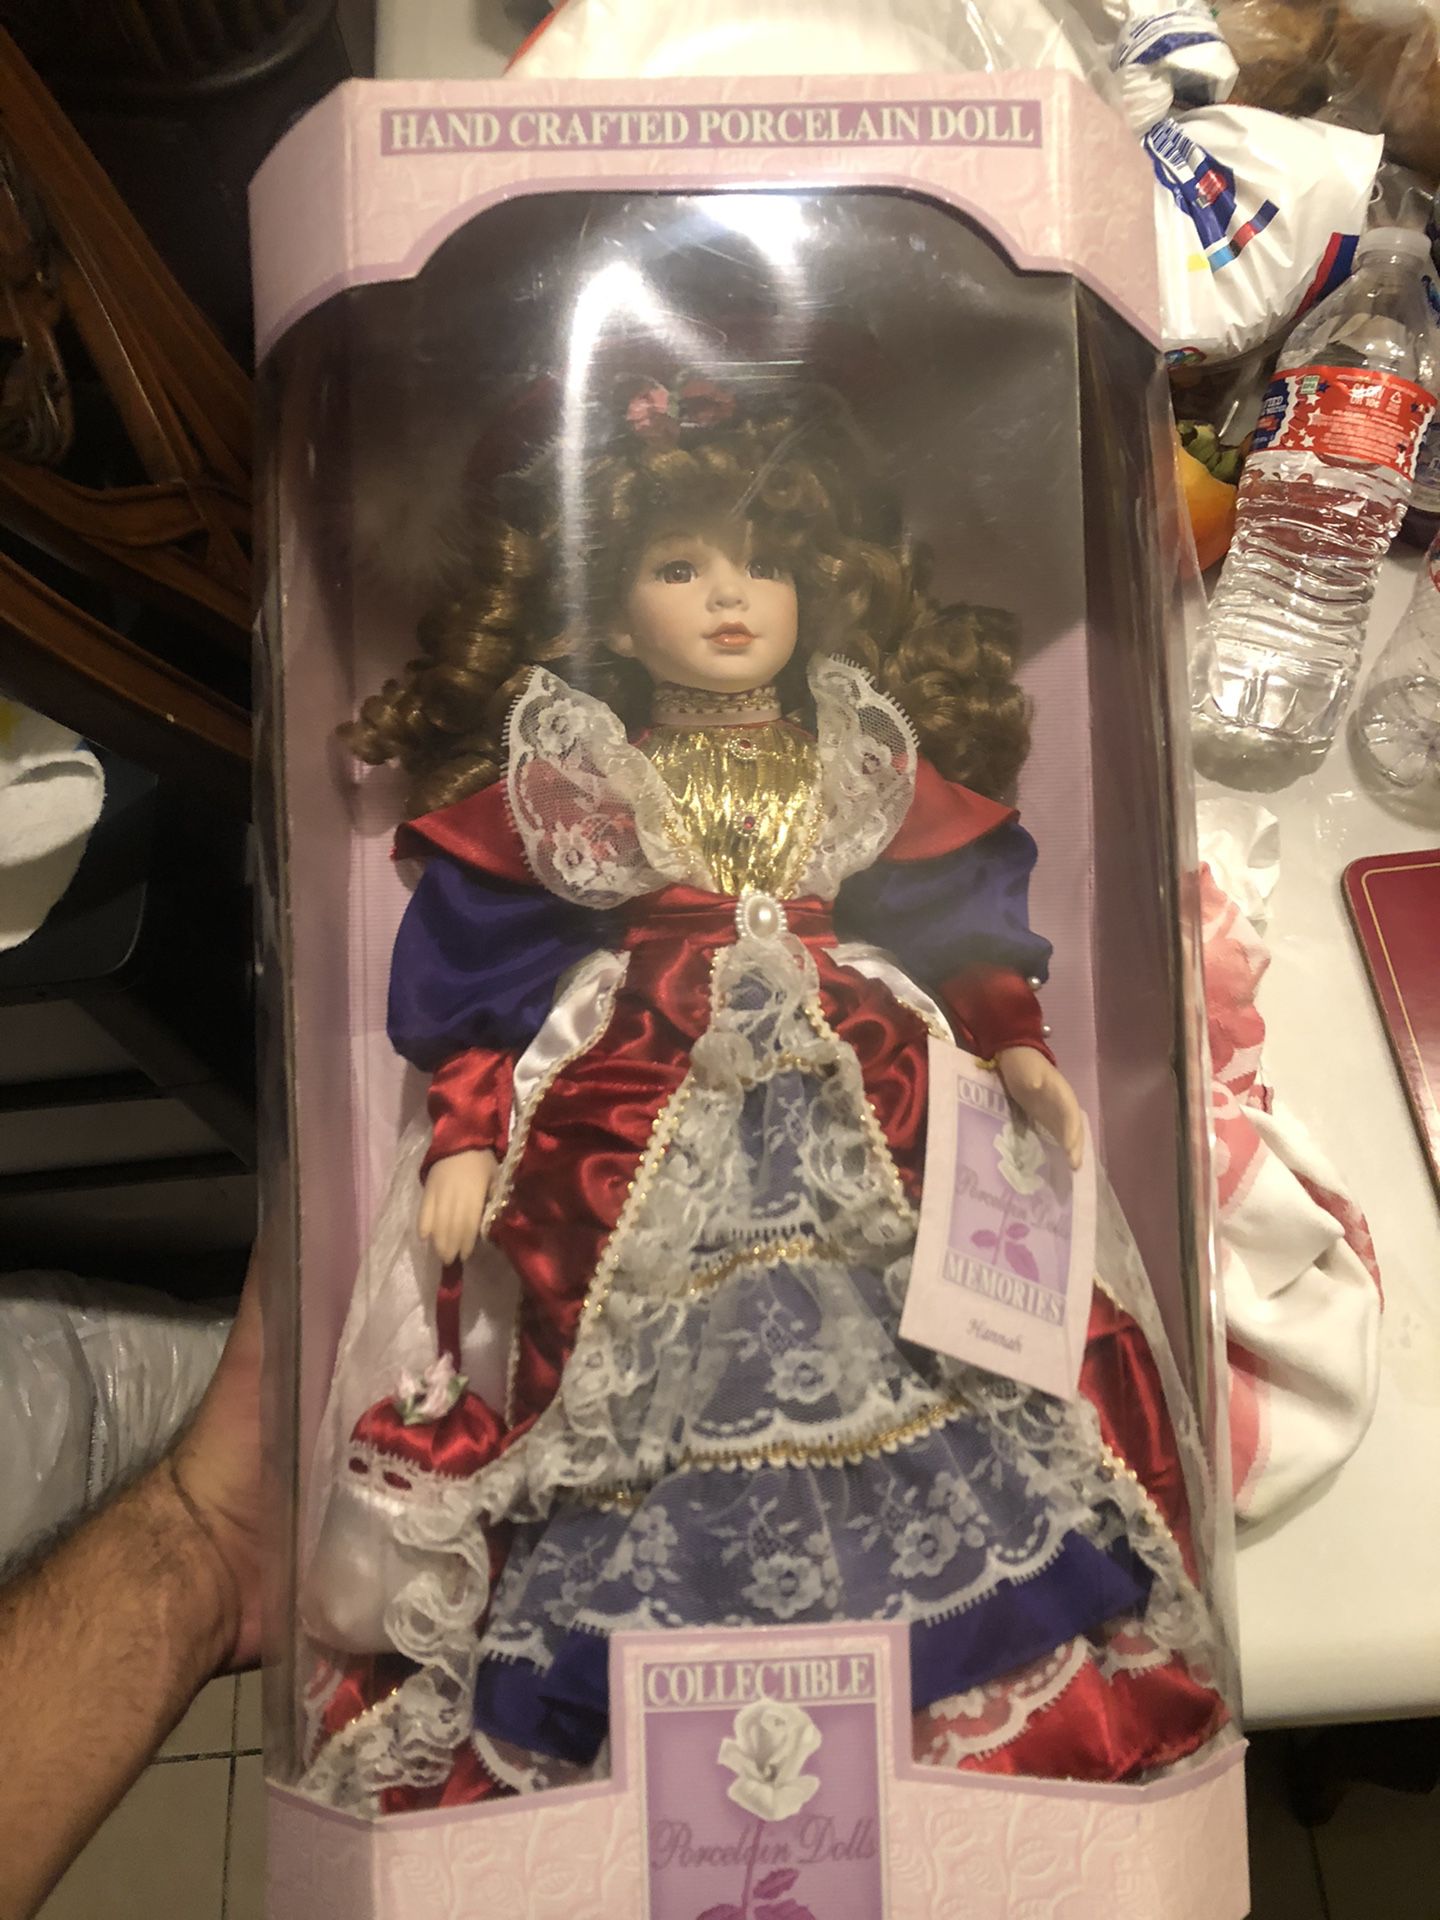 Antique porcelain doll USA color theme still in its package